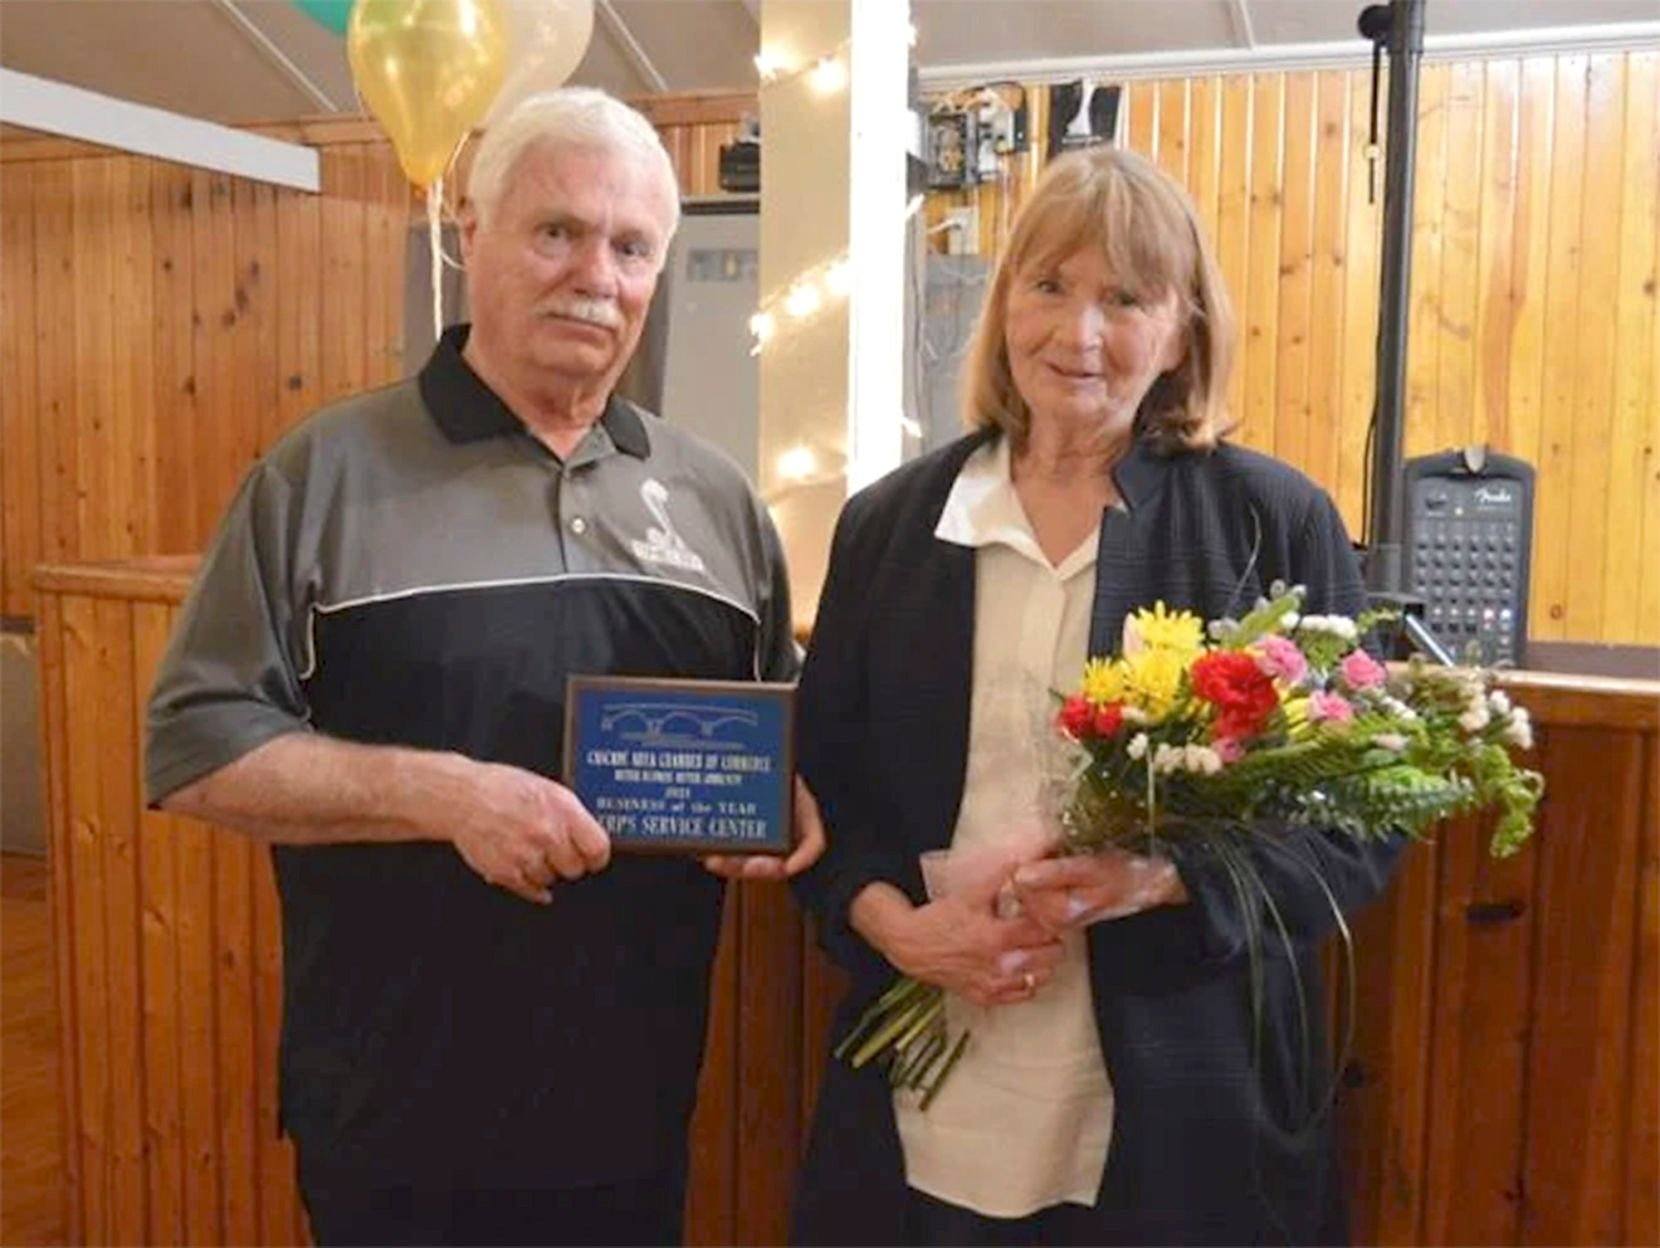 Rick and Deb Kerper are awarded the Cascade Area Chamber of Commerce’s Business of the Year Award.    PHOTO CREDIT: Daniel Charland